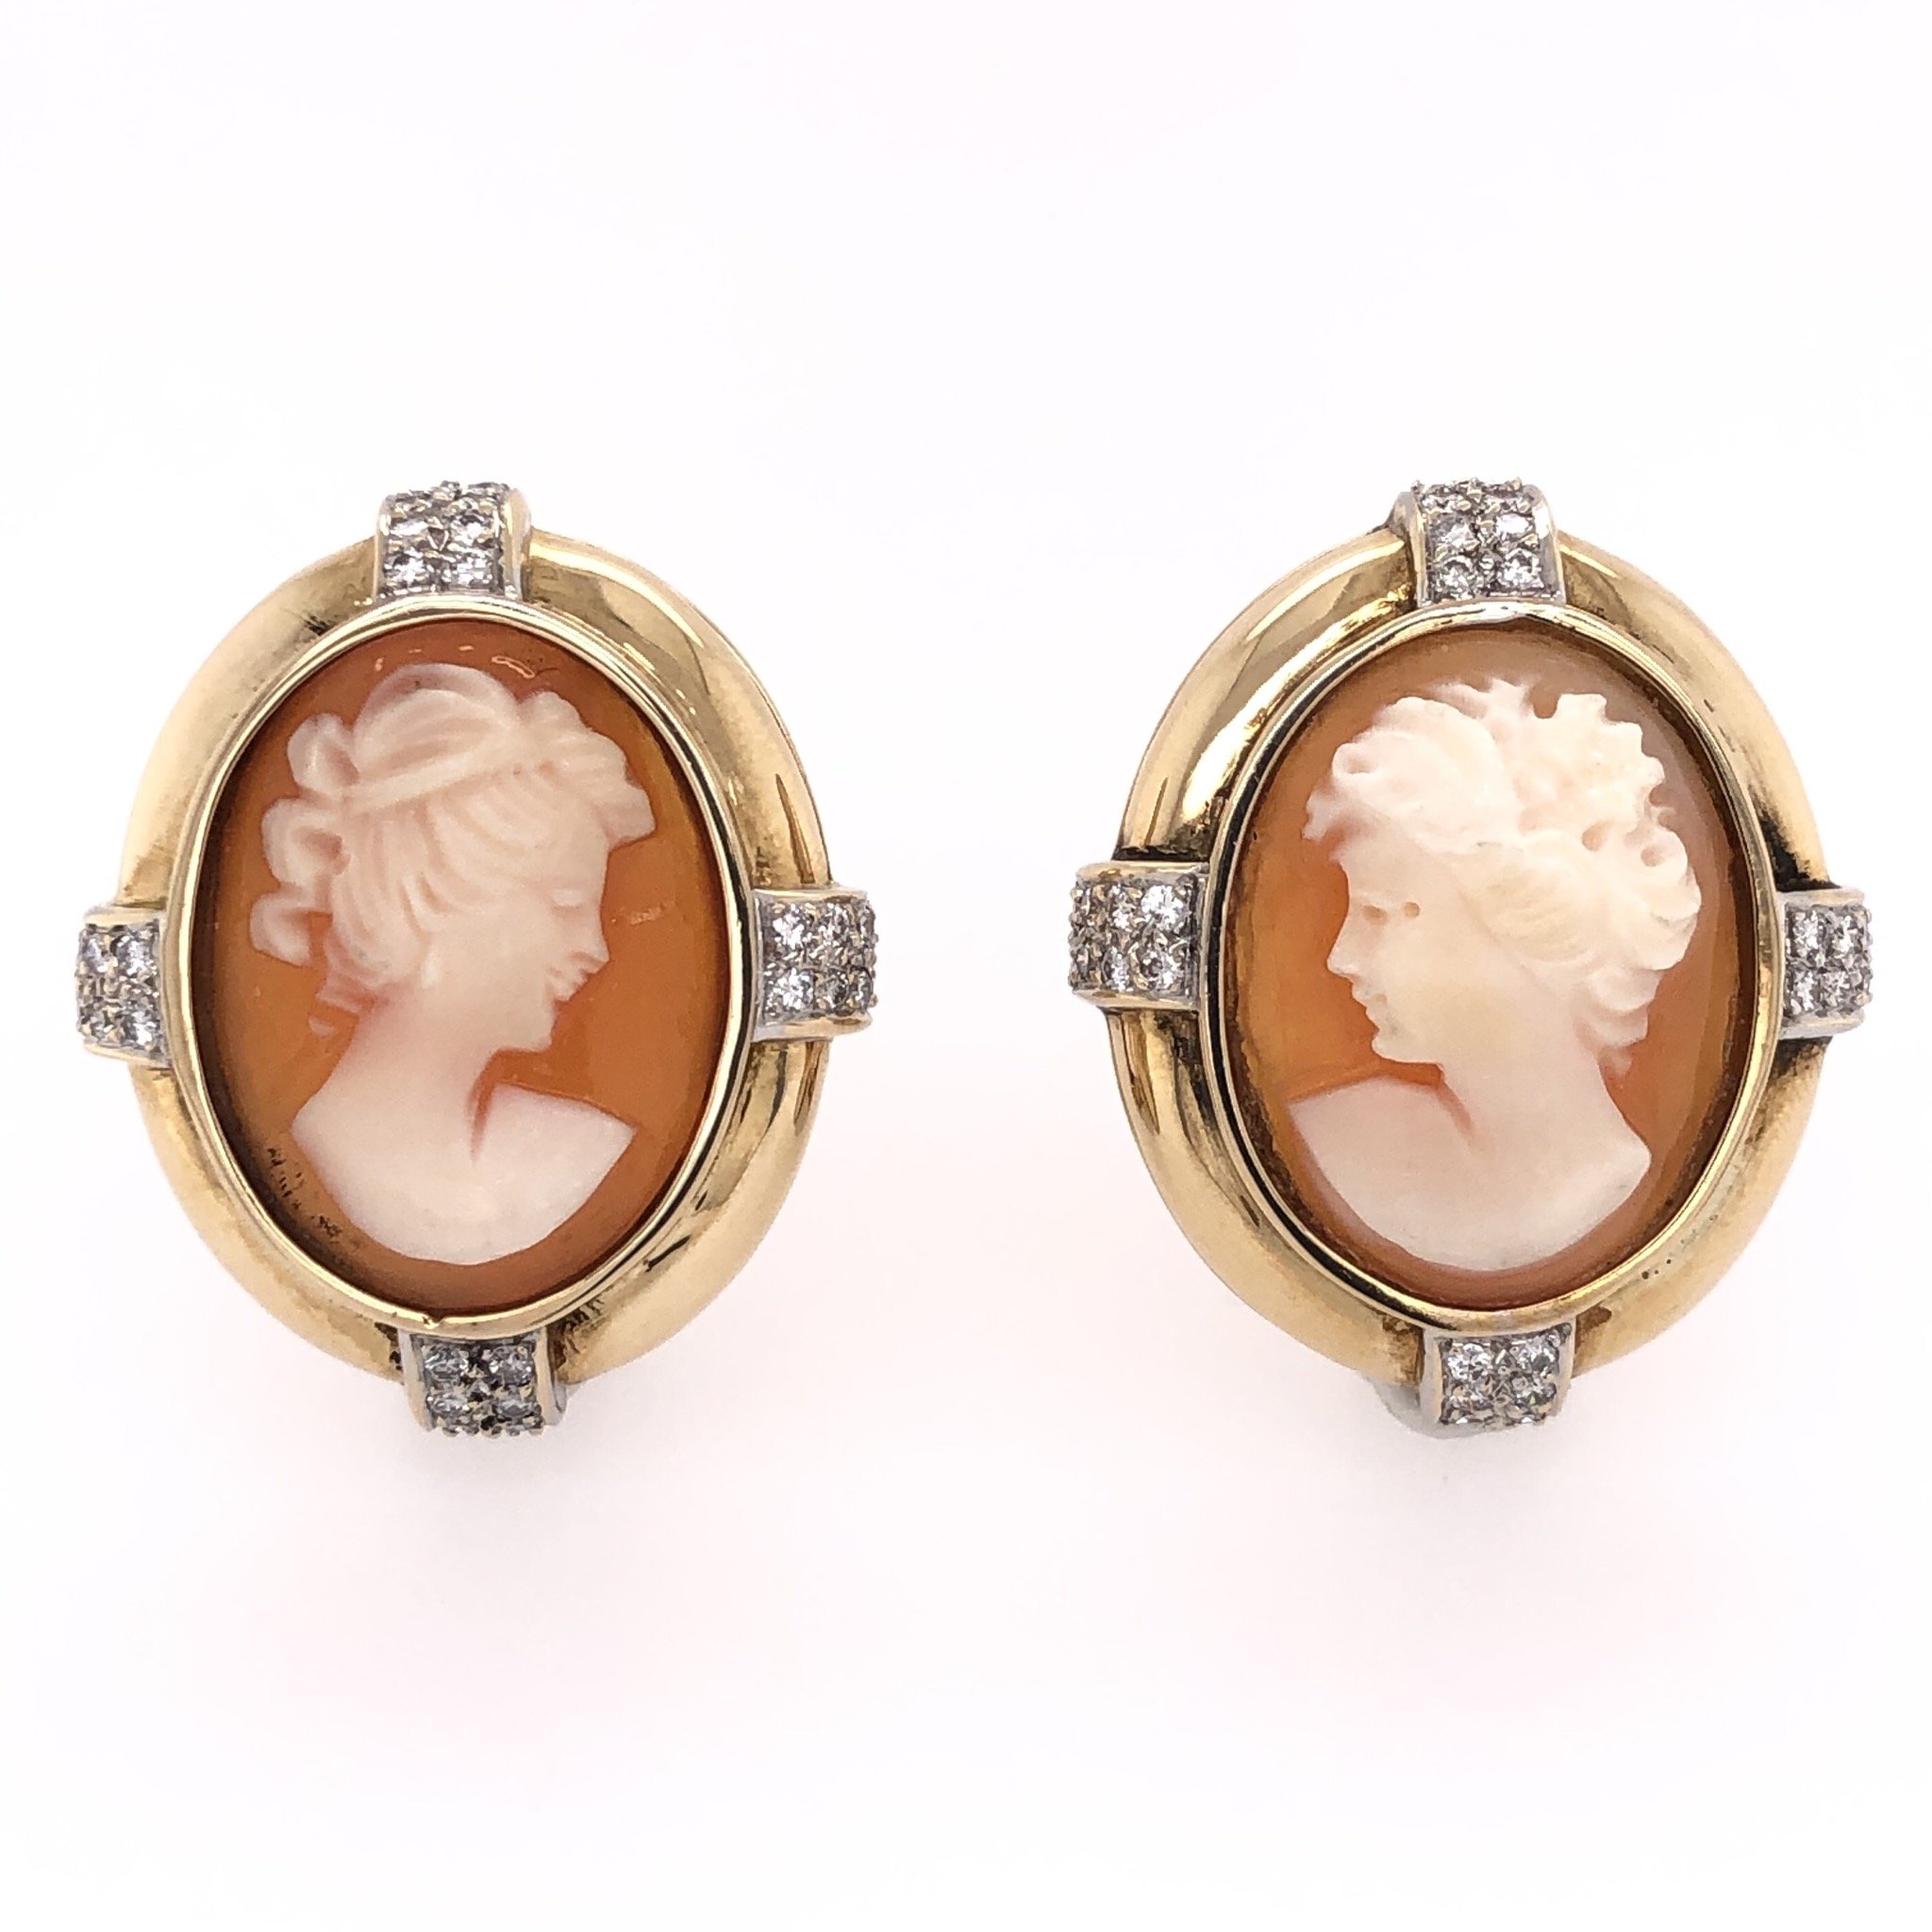 14K Yellow Gold Large Shell Cameo Earrings French Clips .64tcw diamonds, 16.5g, 1.1" tall